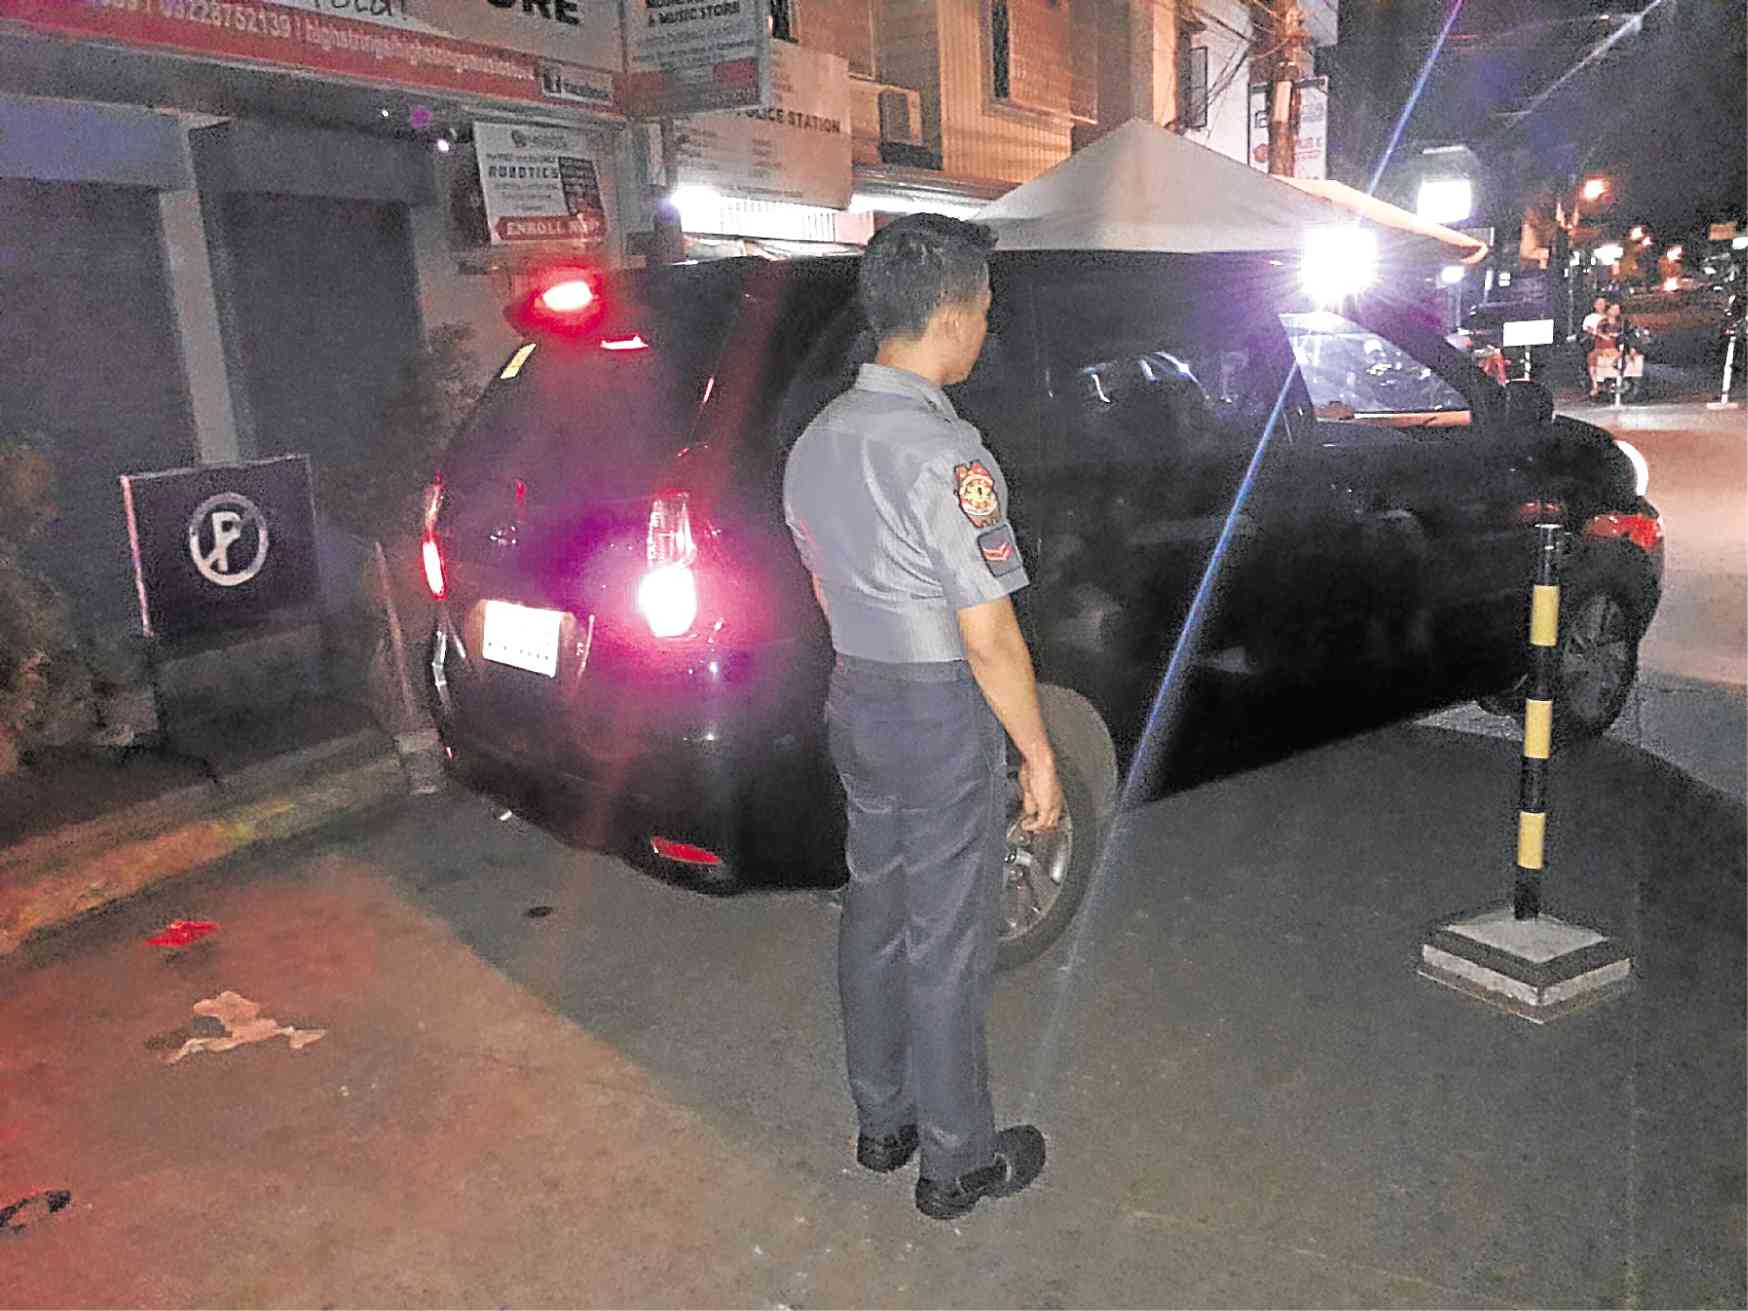 Slain Grab driver’s car turns up in Quezon